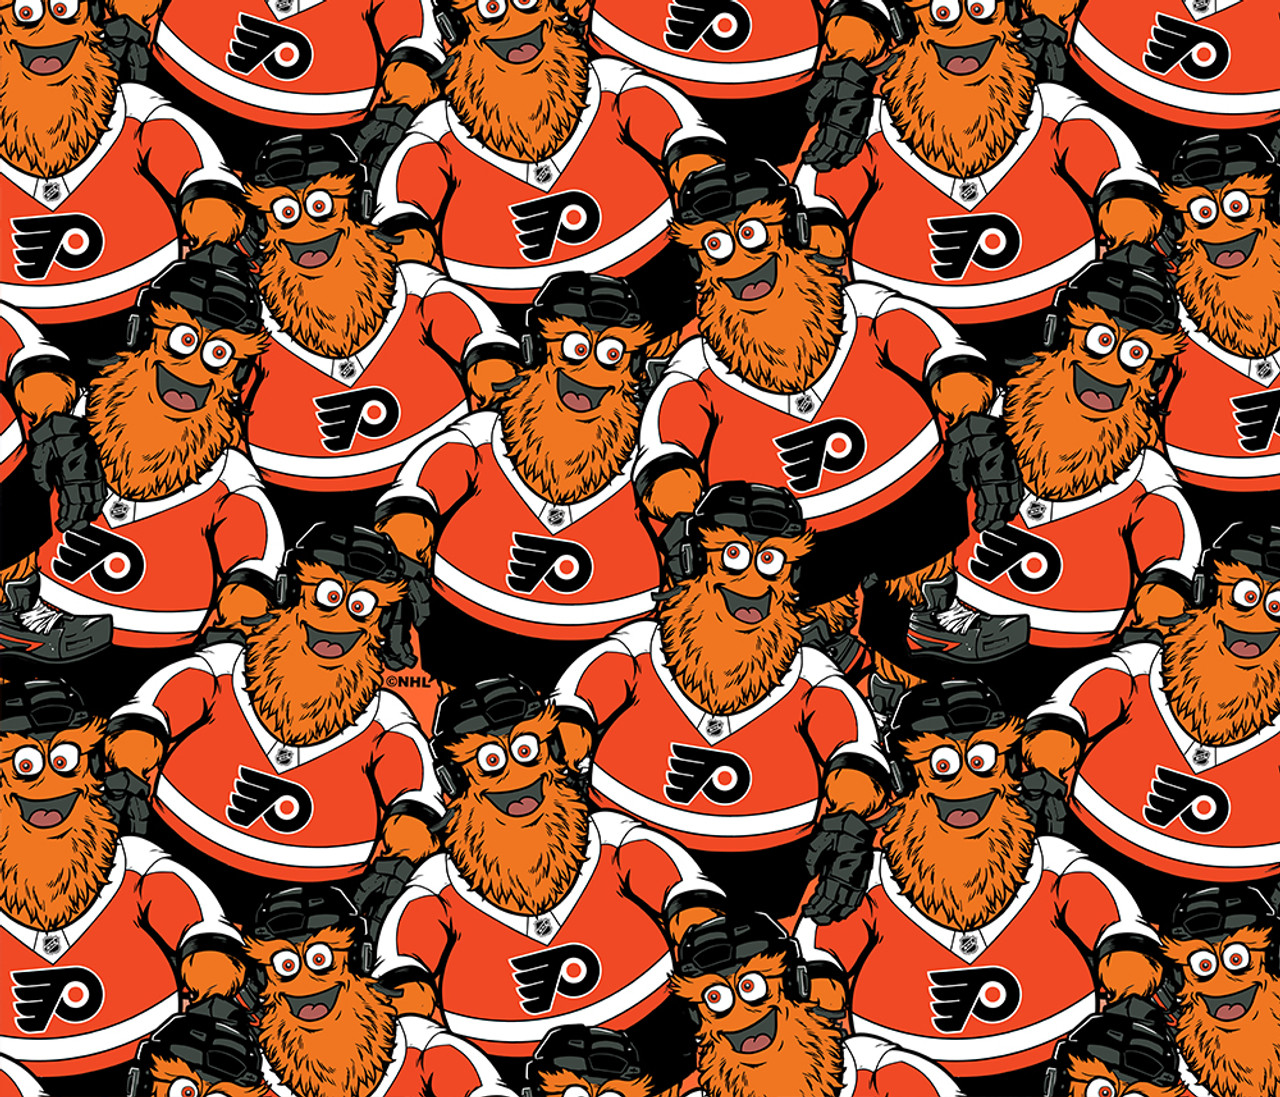 Philadelphia Flyers Fleece Fabric with Gritty Mascot Print-Sold By the Yard